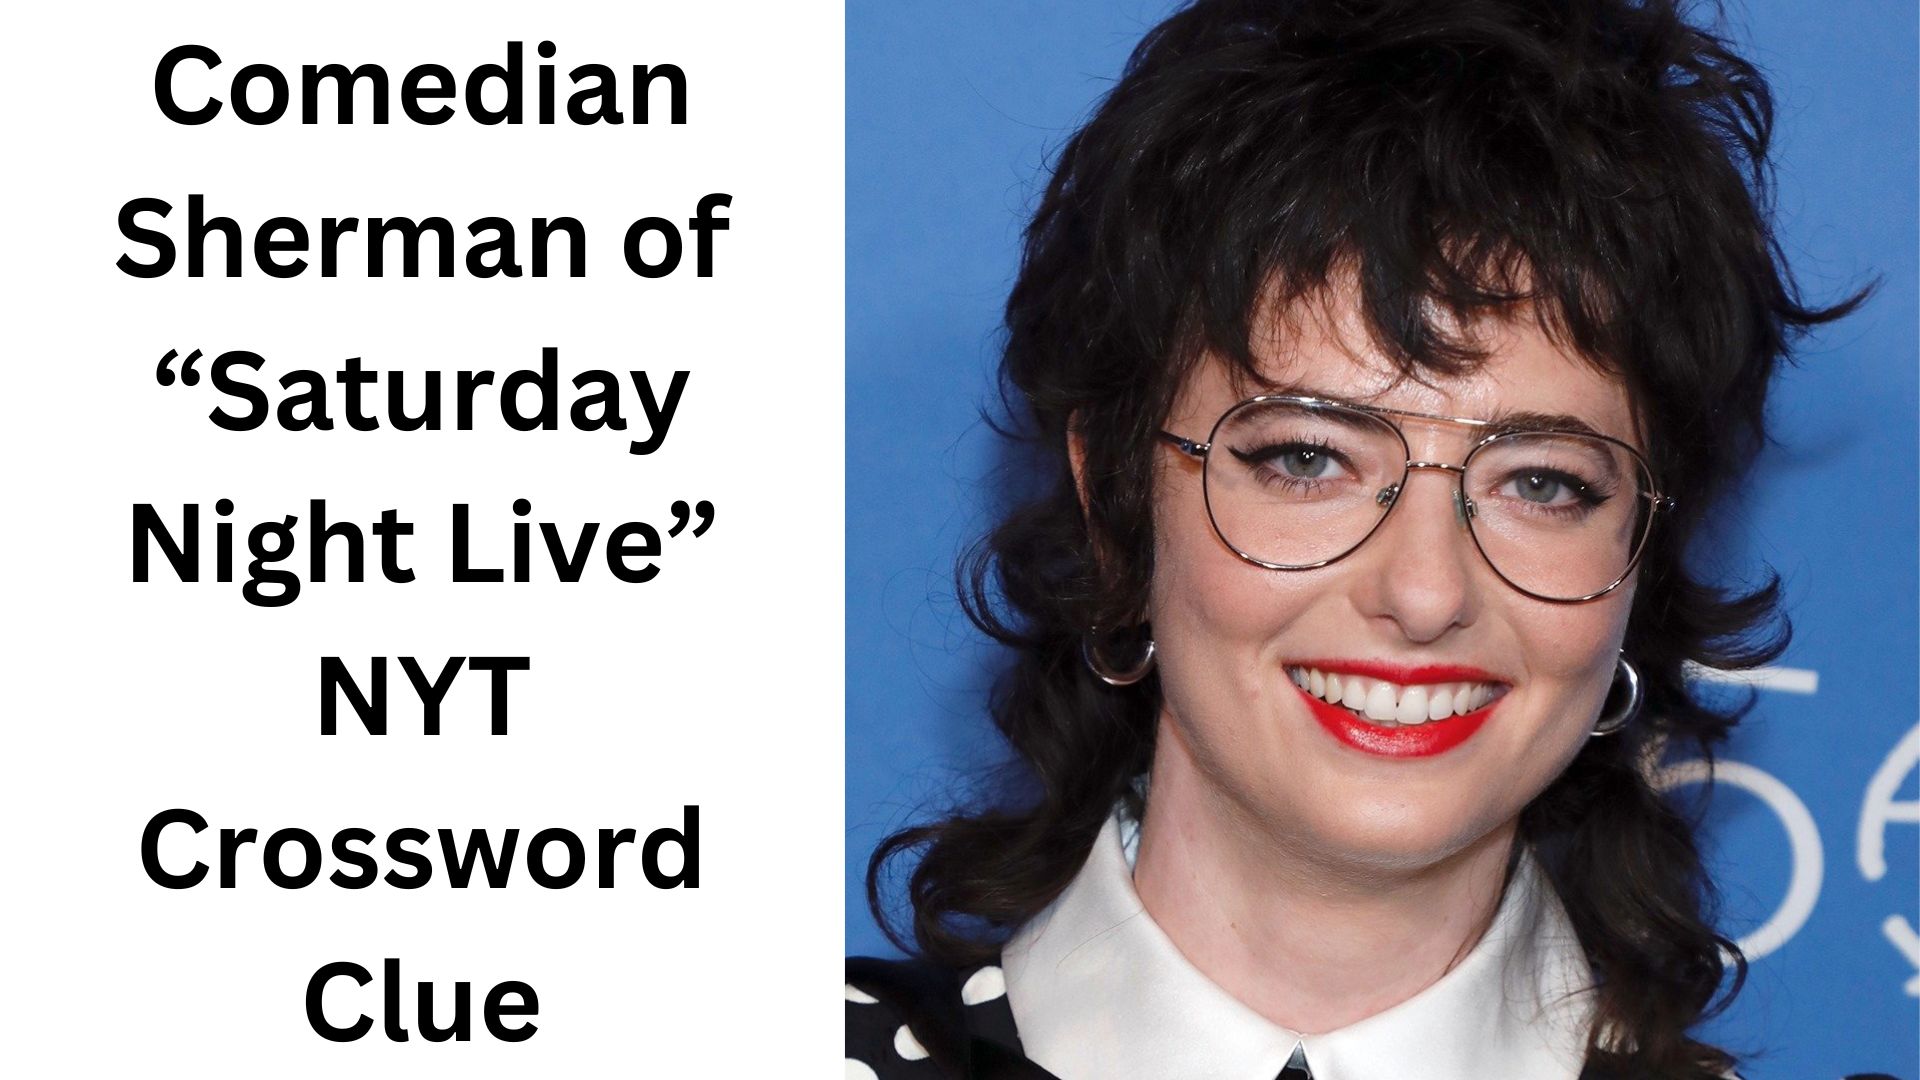 Comedian Sherman of "Saturday Night Live" NYT Crossword Clue